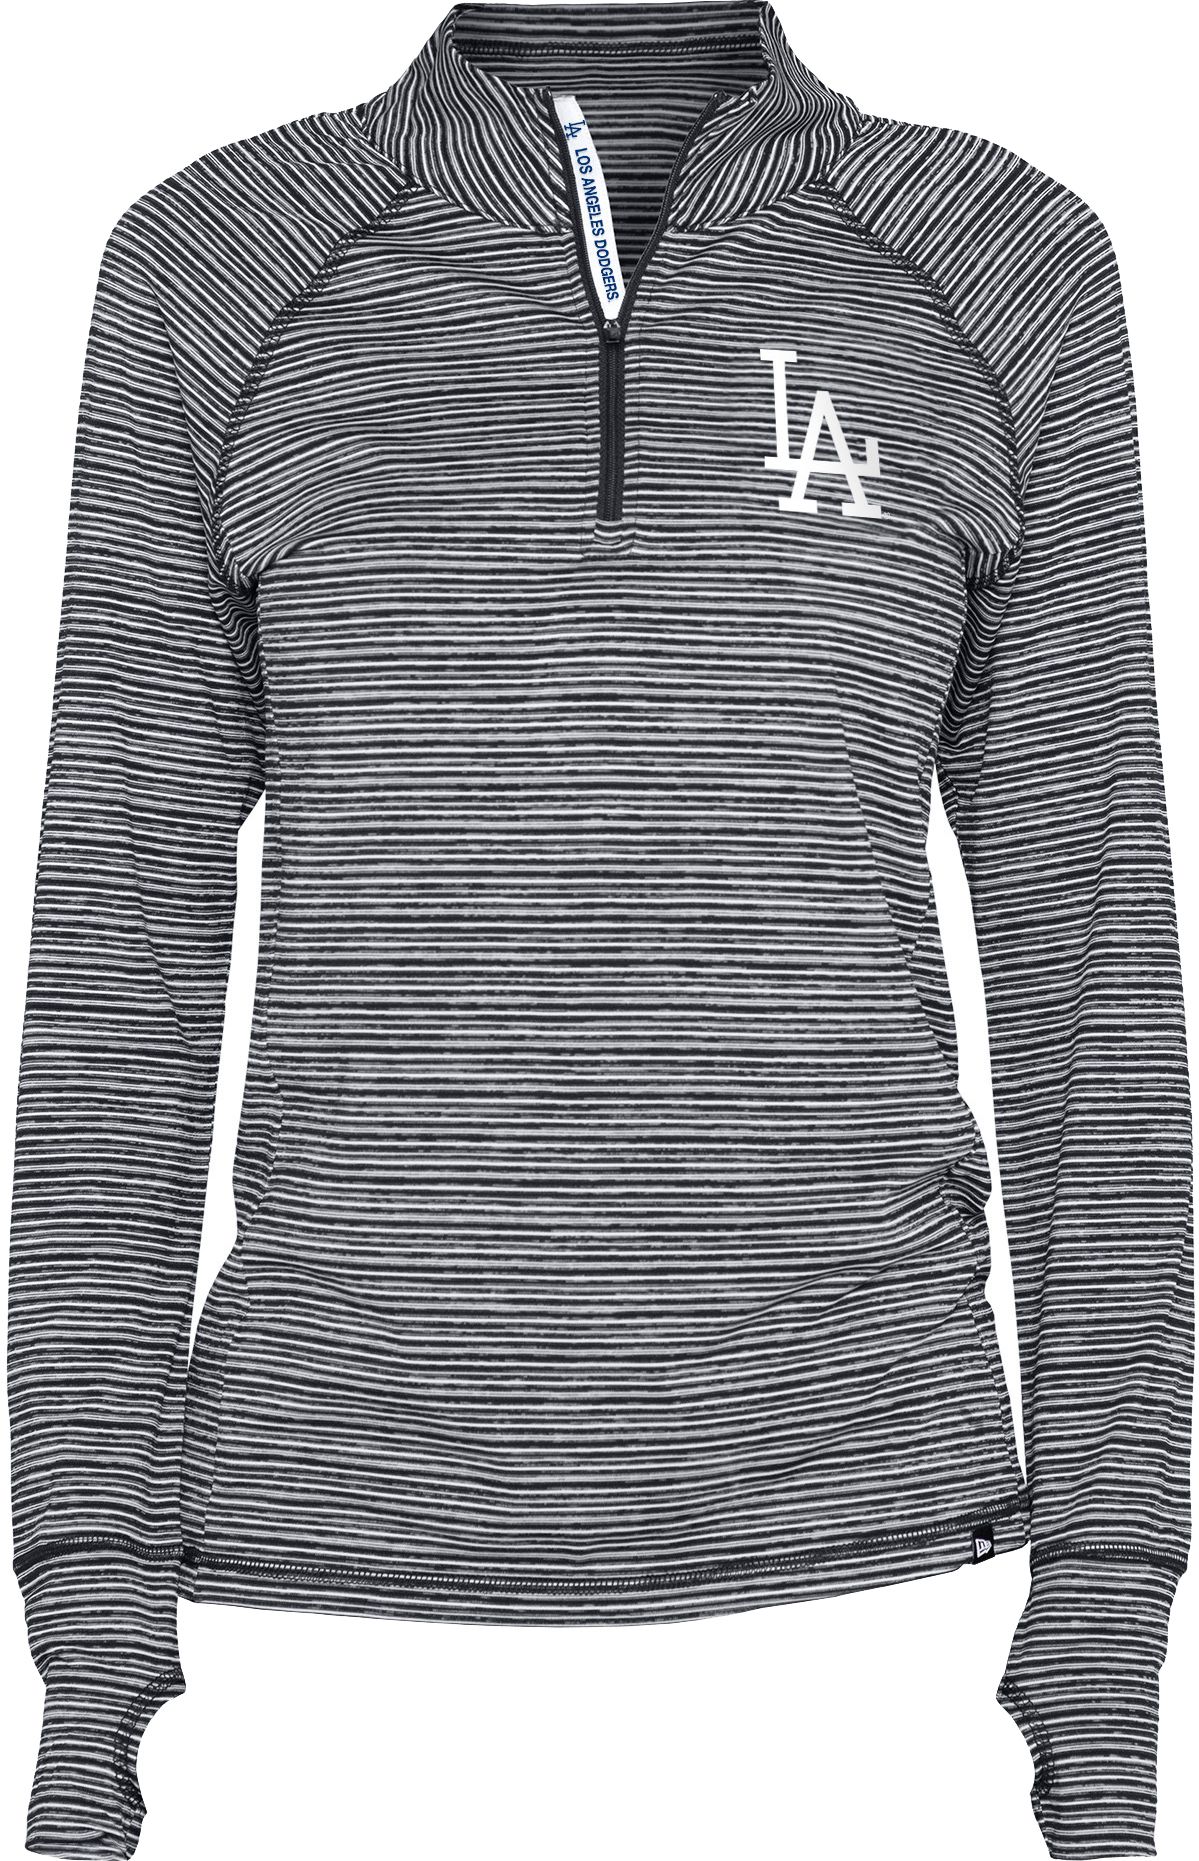 Los Angeles Dodgers Concepts Sport Women's Mainstream Terry Long Sleeve  Hoodie Top - Gray